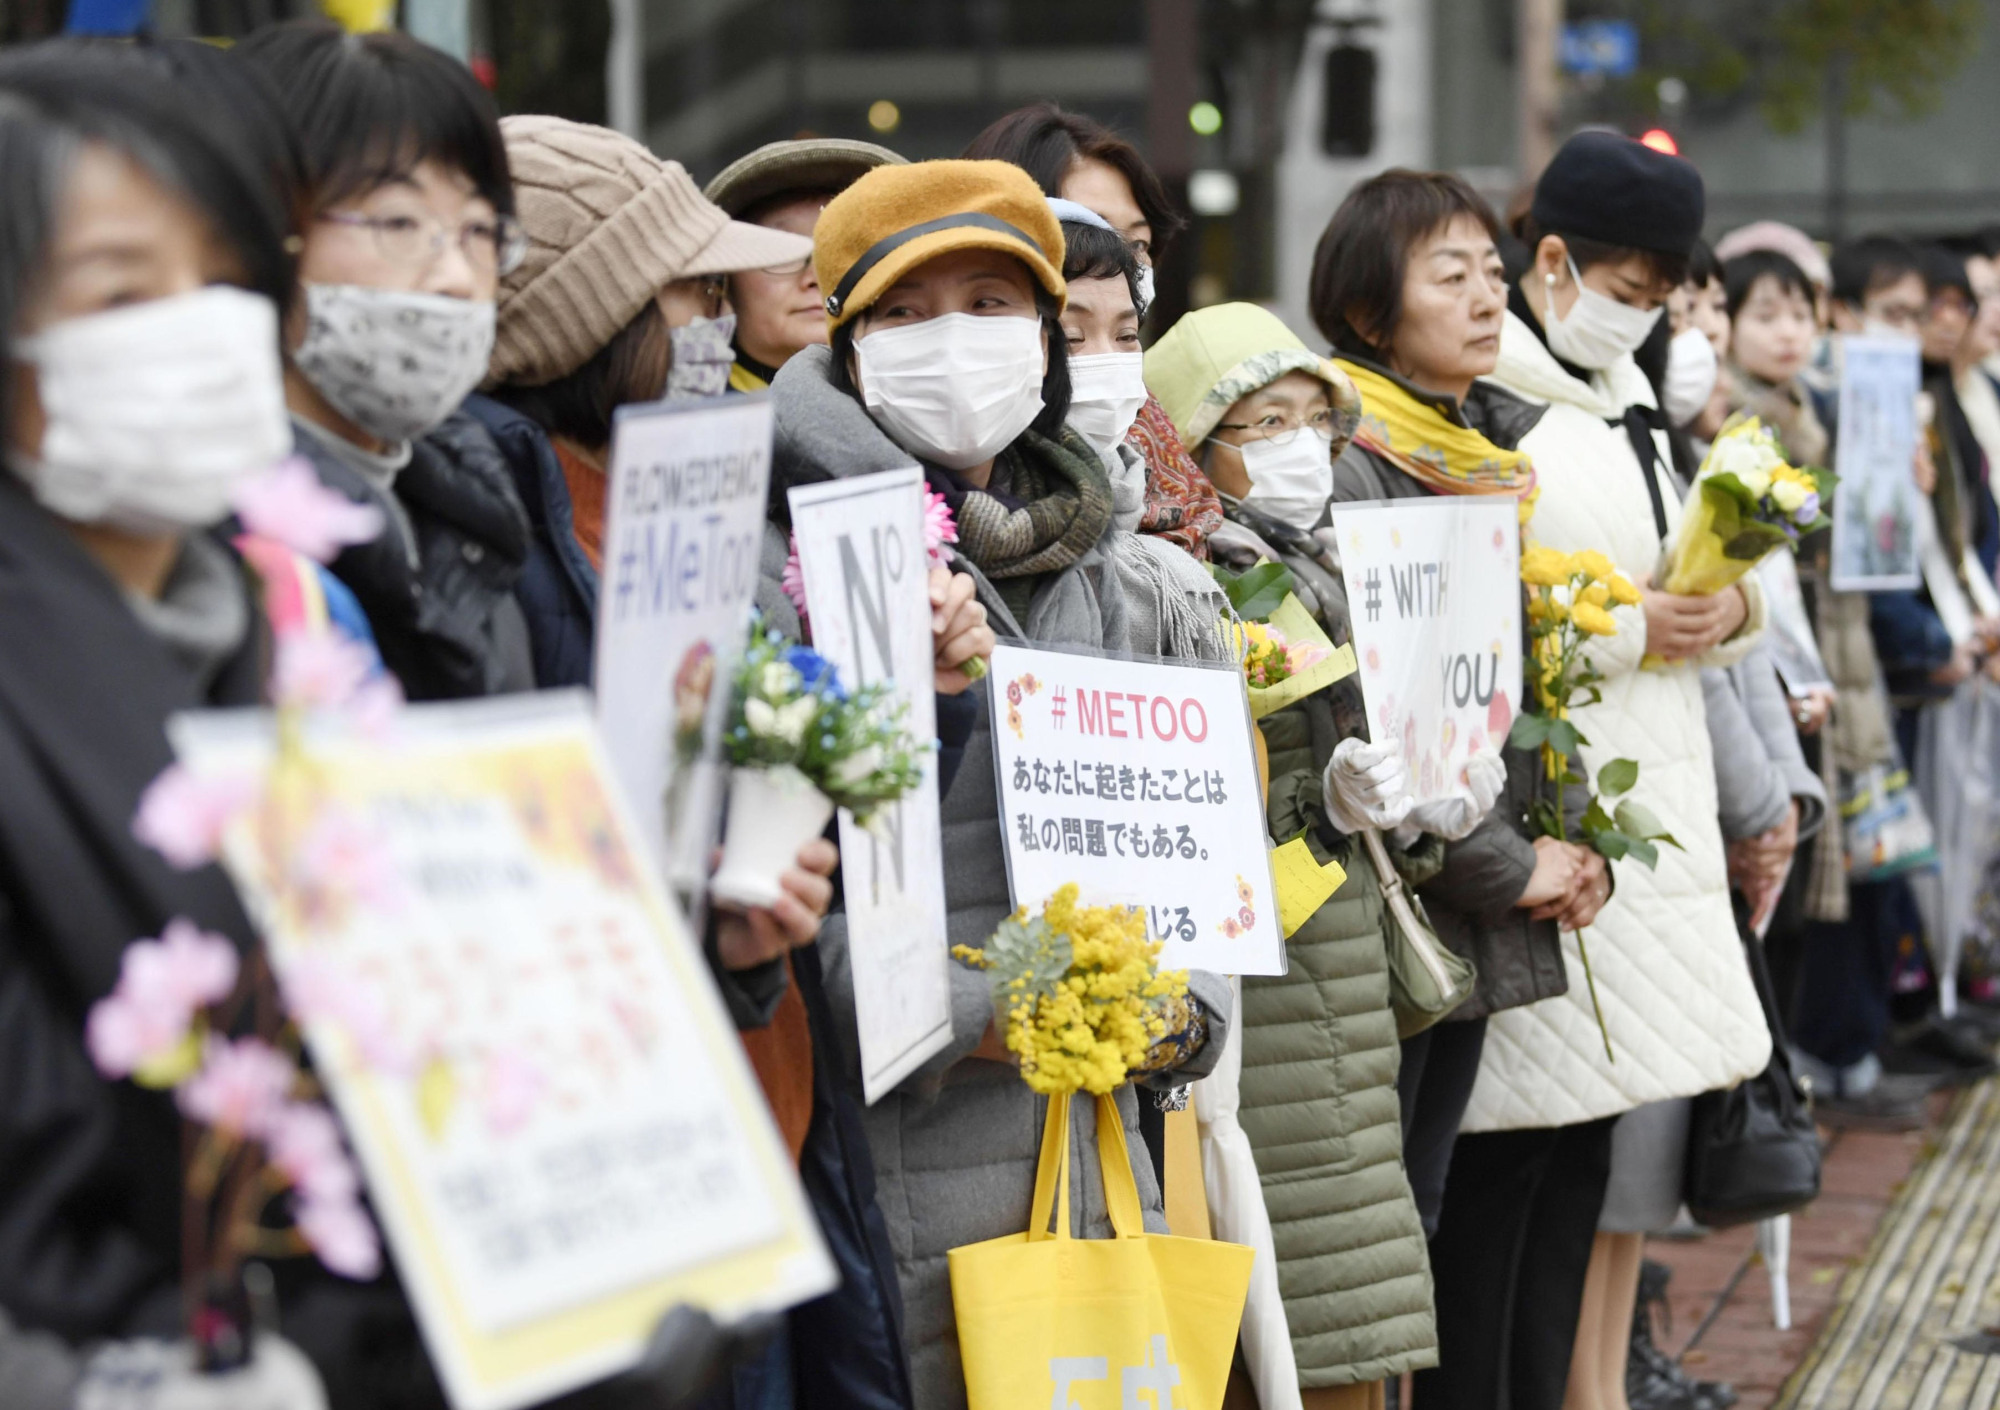 Protesters attend a gathering of the Flower Demo movement against sexual violence in Nagoya on Sunday, International Women's Day. The nationwide movement was triggered by outrage over district court acquittals in several sexual assault cases in March 2019. | KYODO